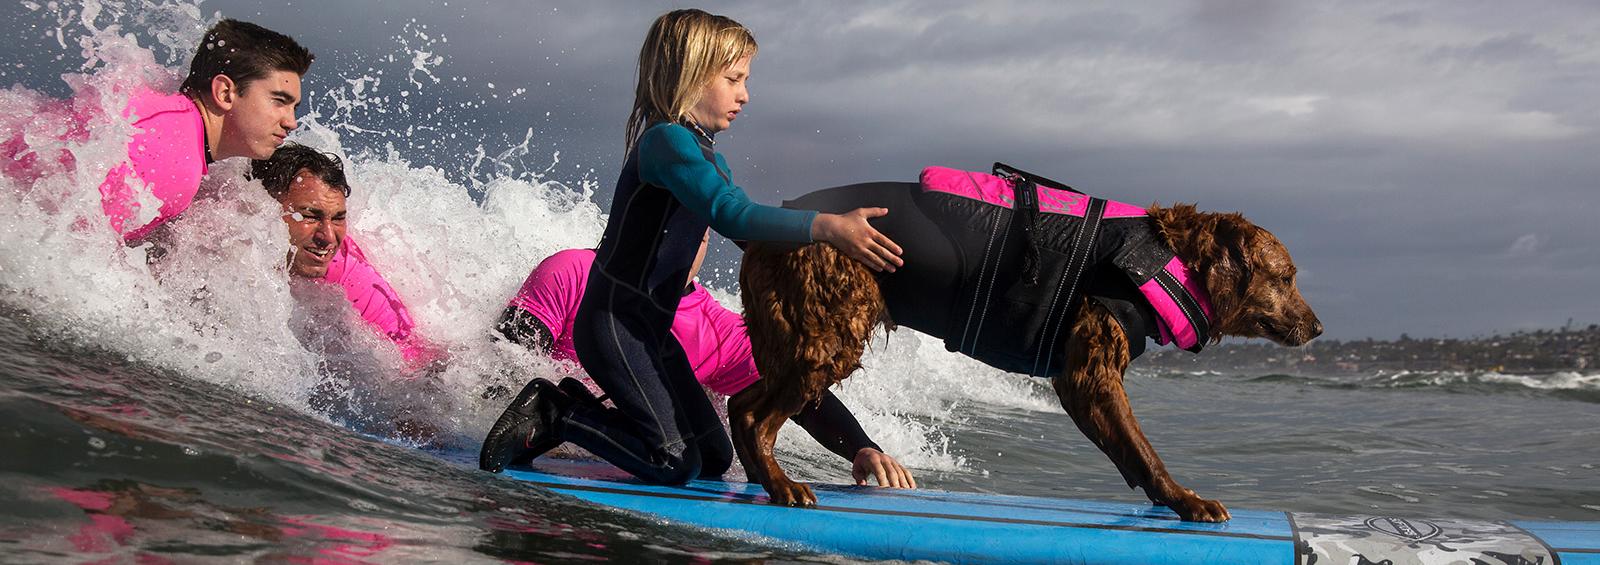 Young girl holds on to back-end of dog wearing a life vest as they both ride a surfboard in the ocean